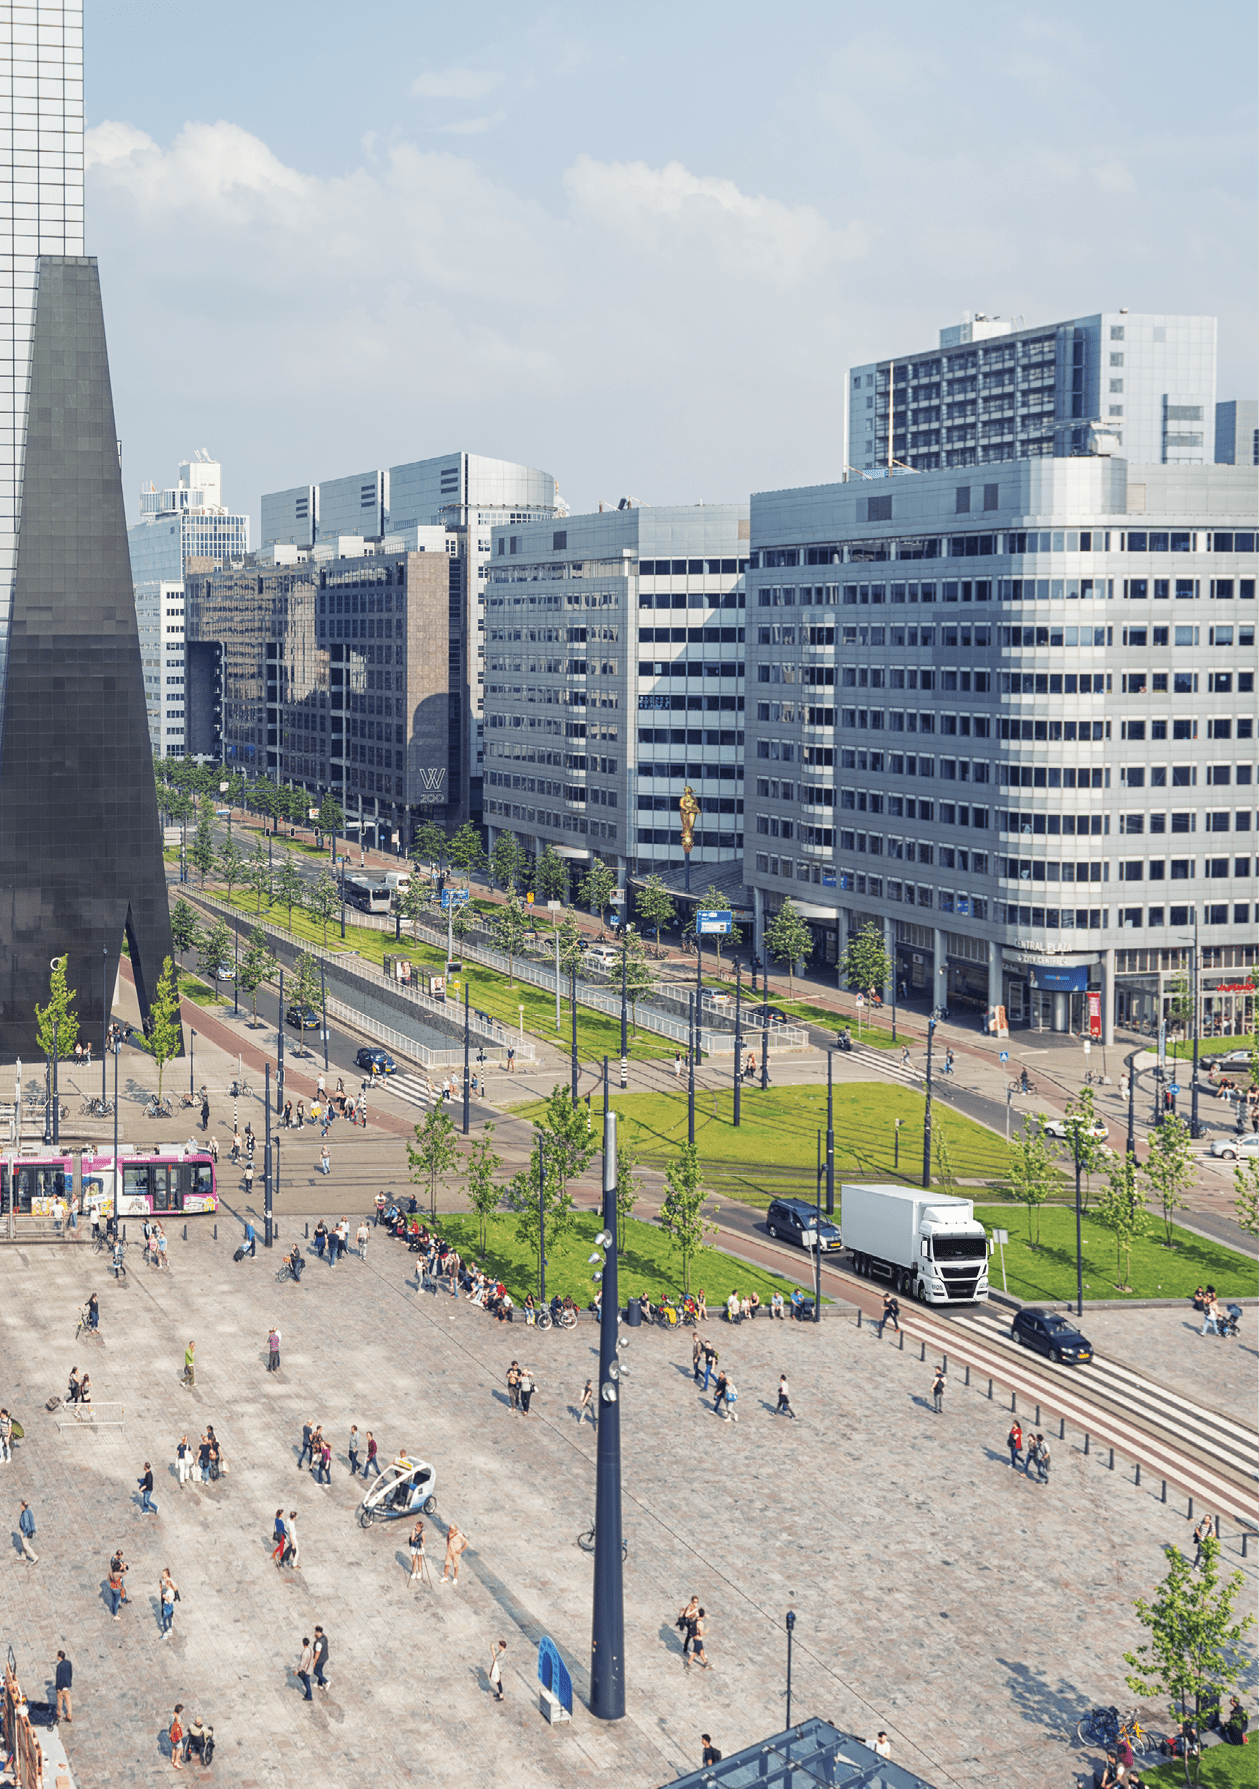 Aerial view of Rotterdam Station Square during a sunny summer day. Letterbox format used.